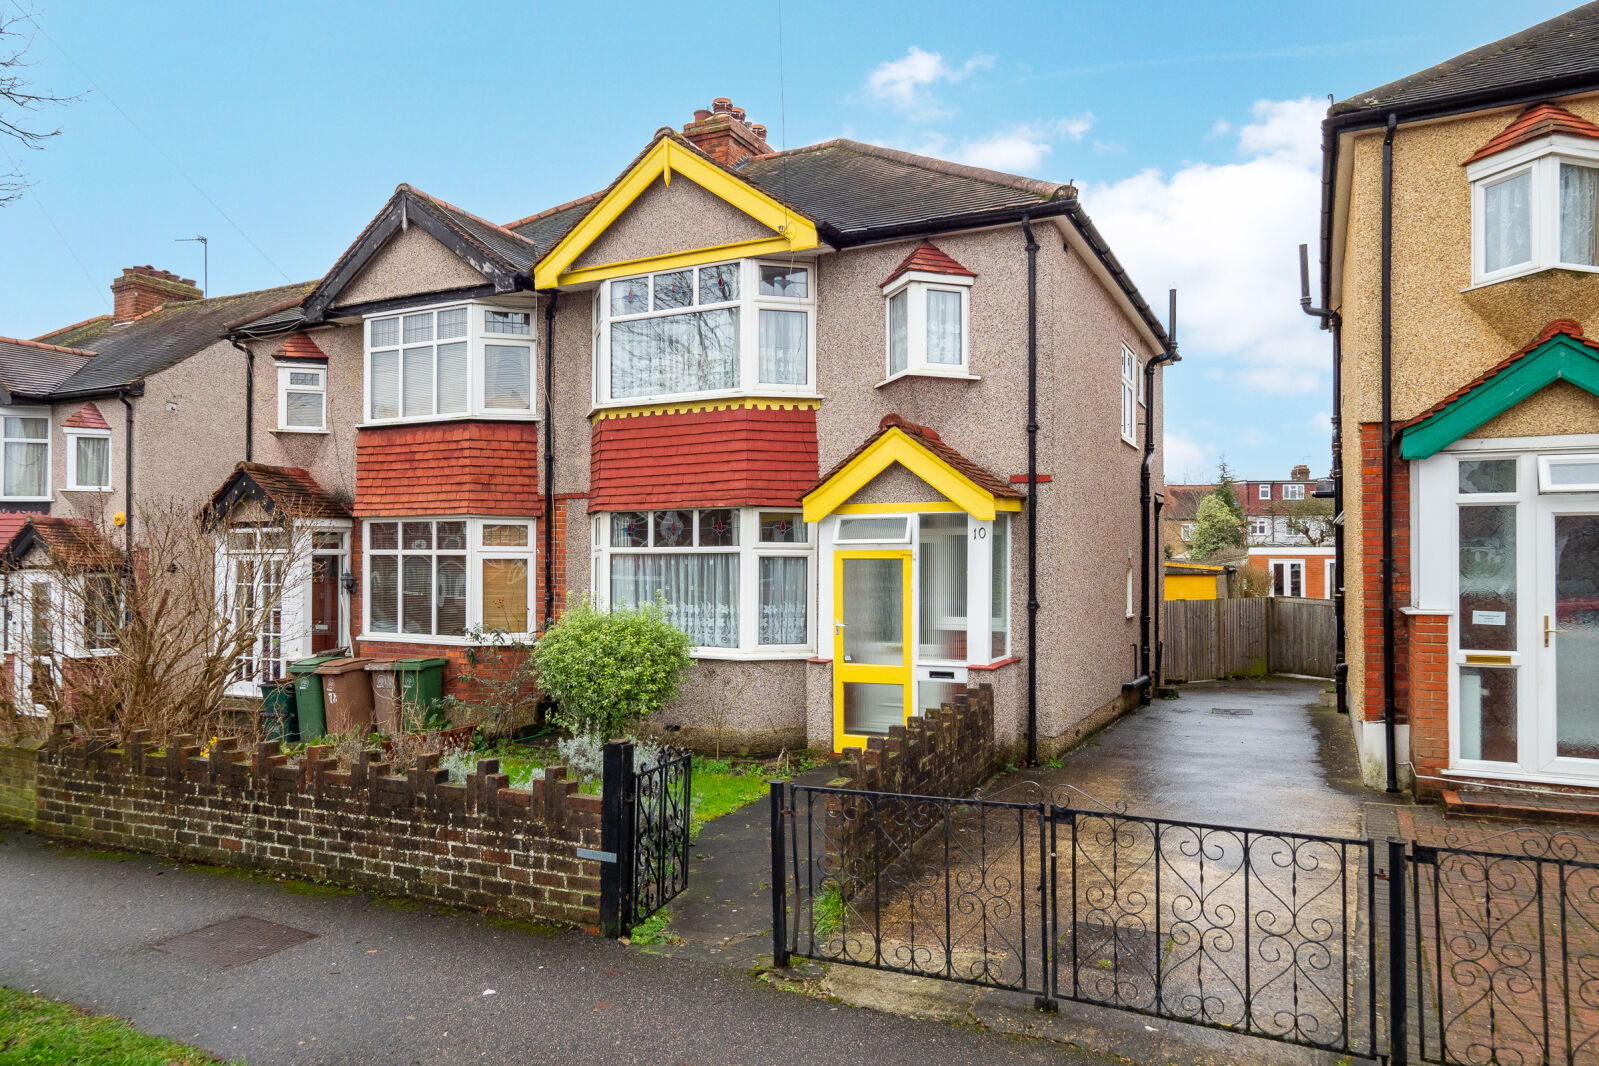 3 bedroom semi detached house for sale Priory Road, Cheam, SM3, main image